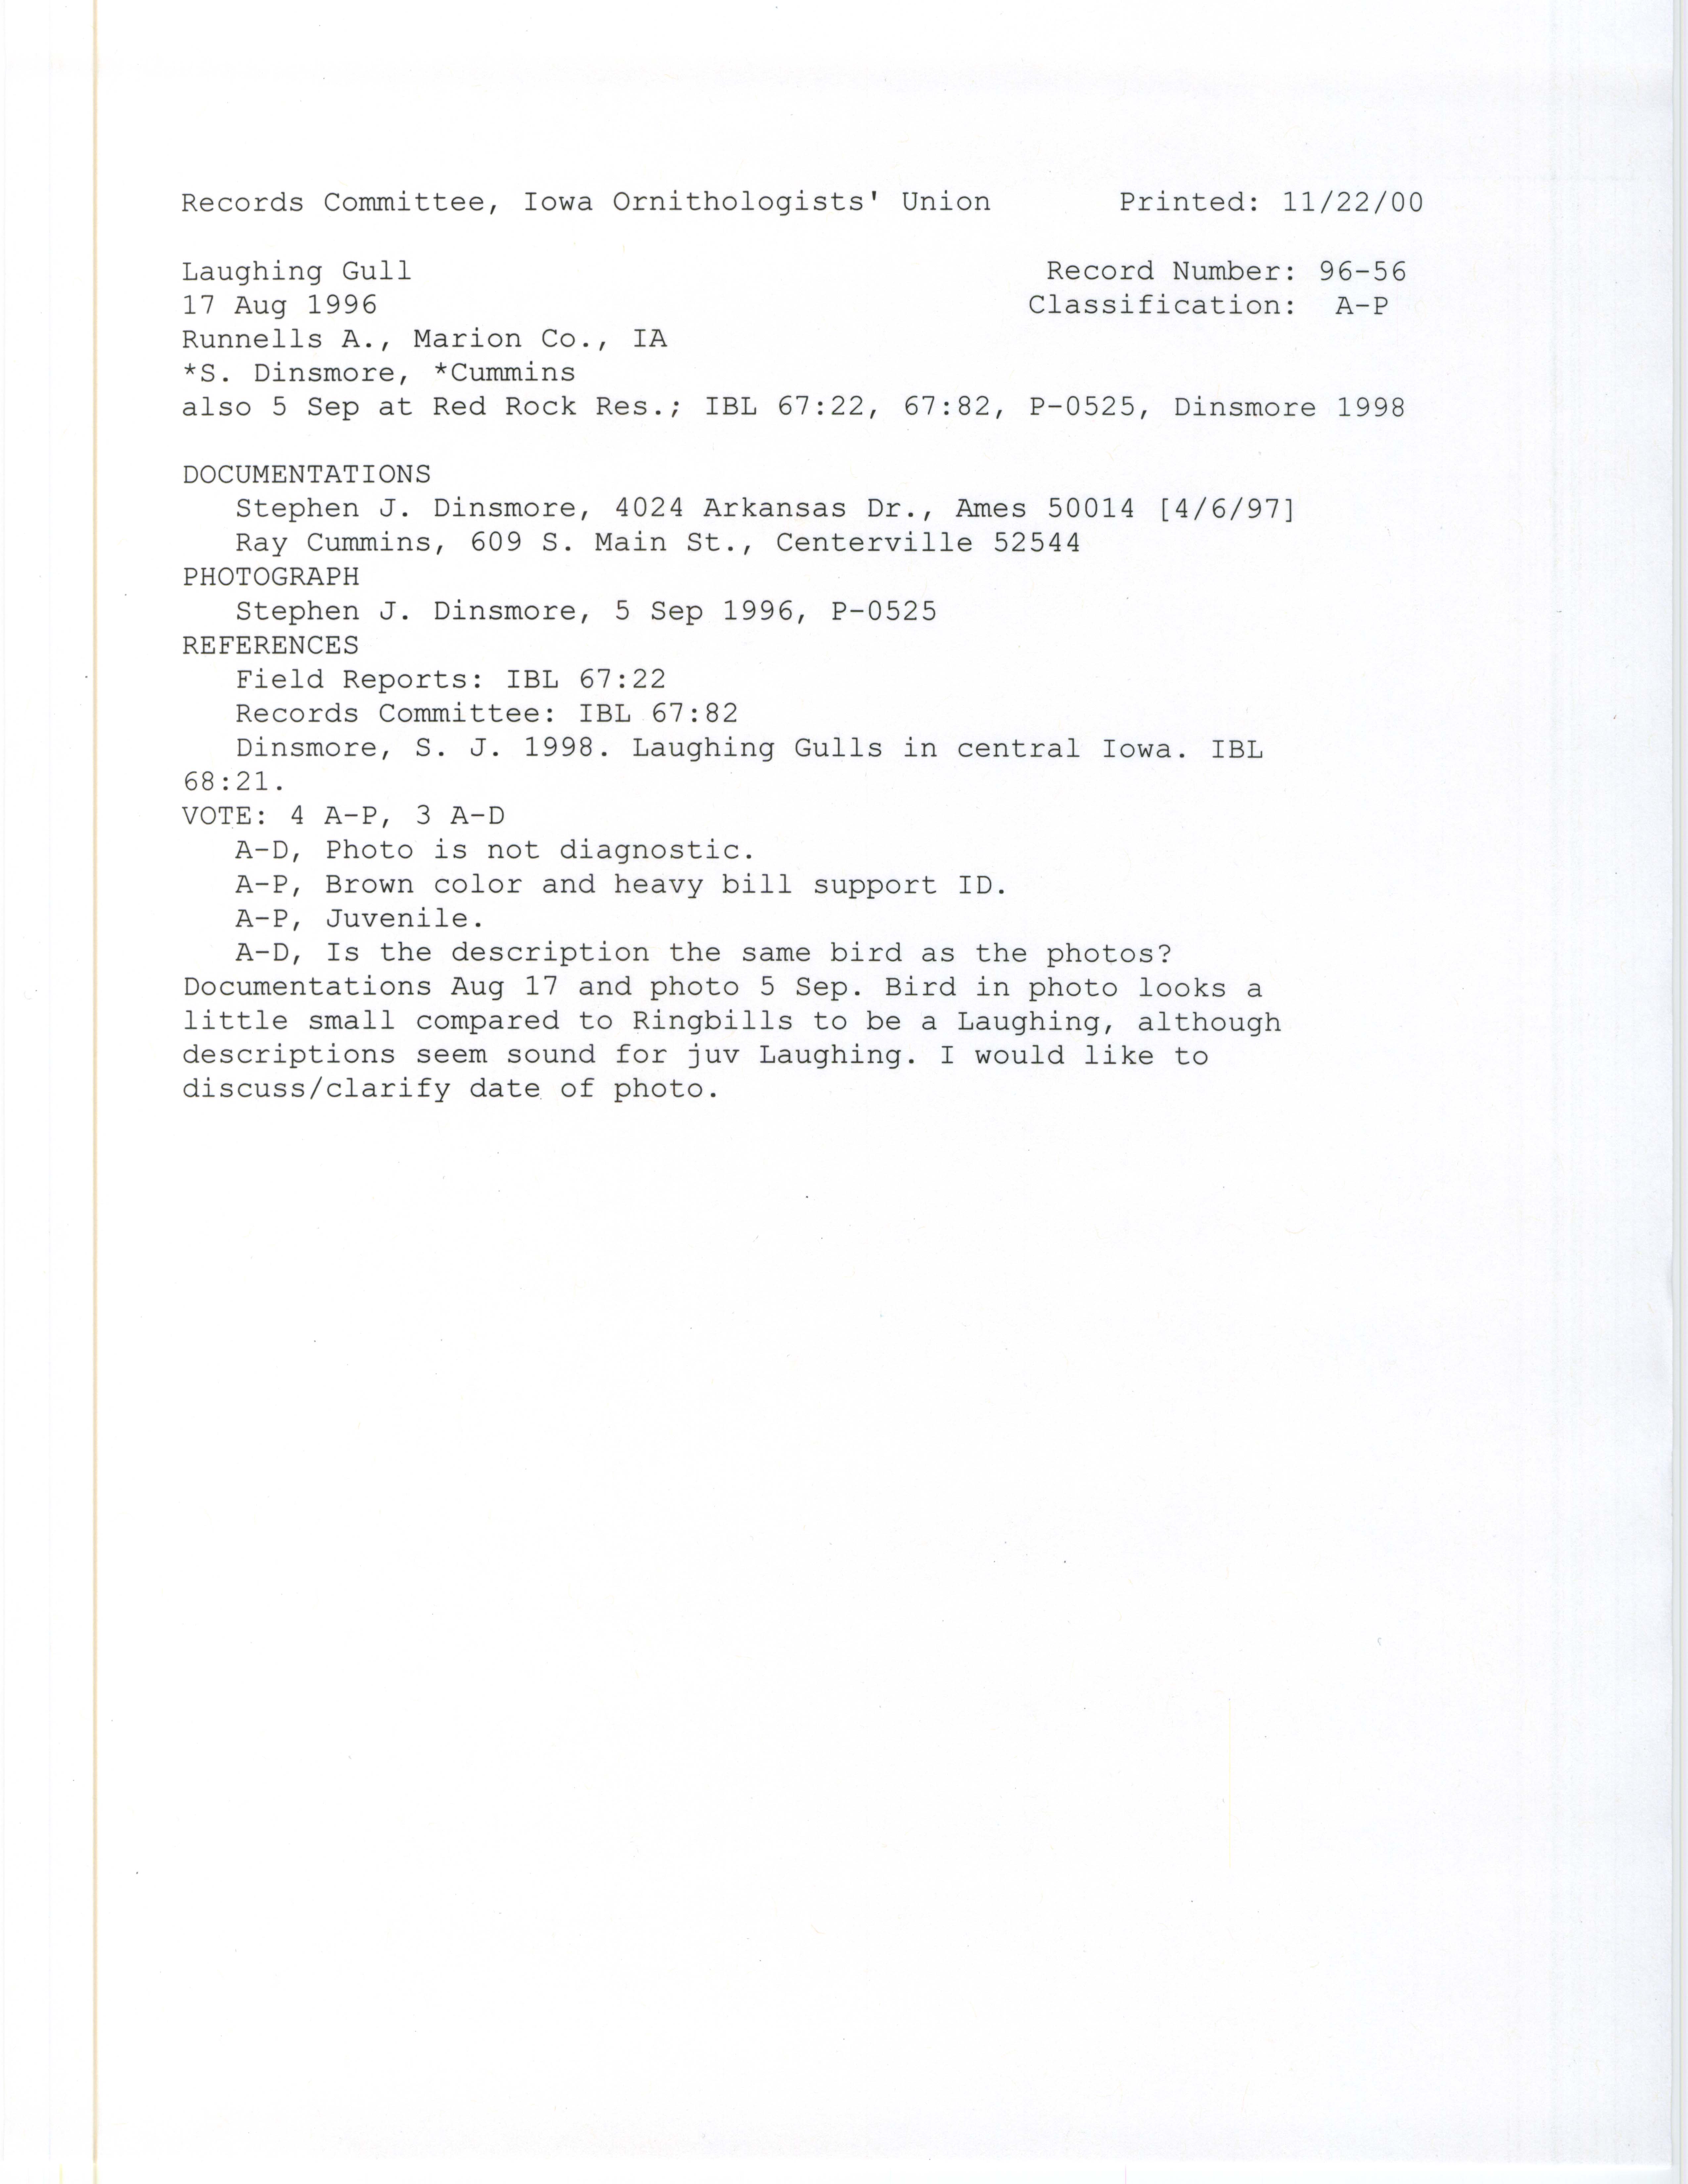 Records Committee review for rare bird sighting of Laughing Gull at Runnells Area, 1996